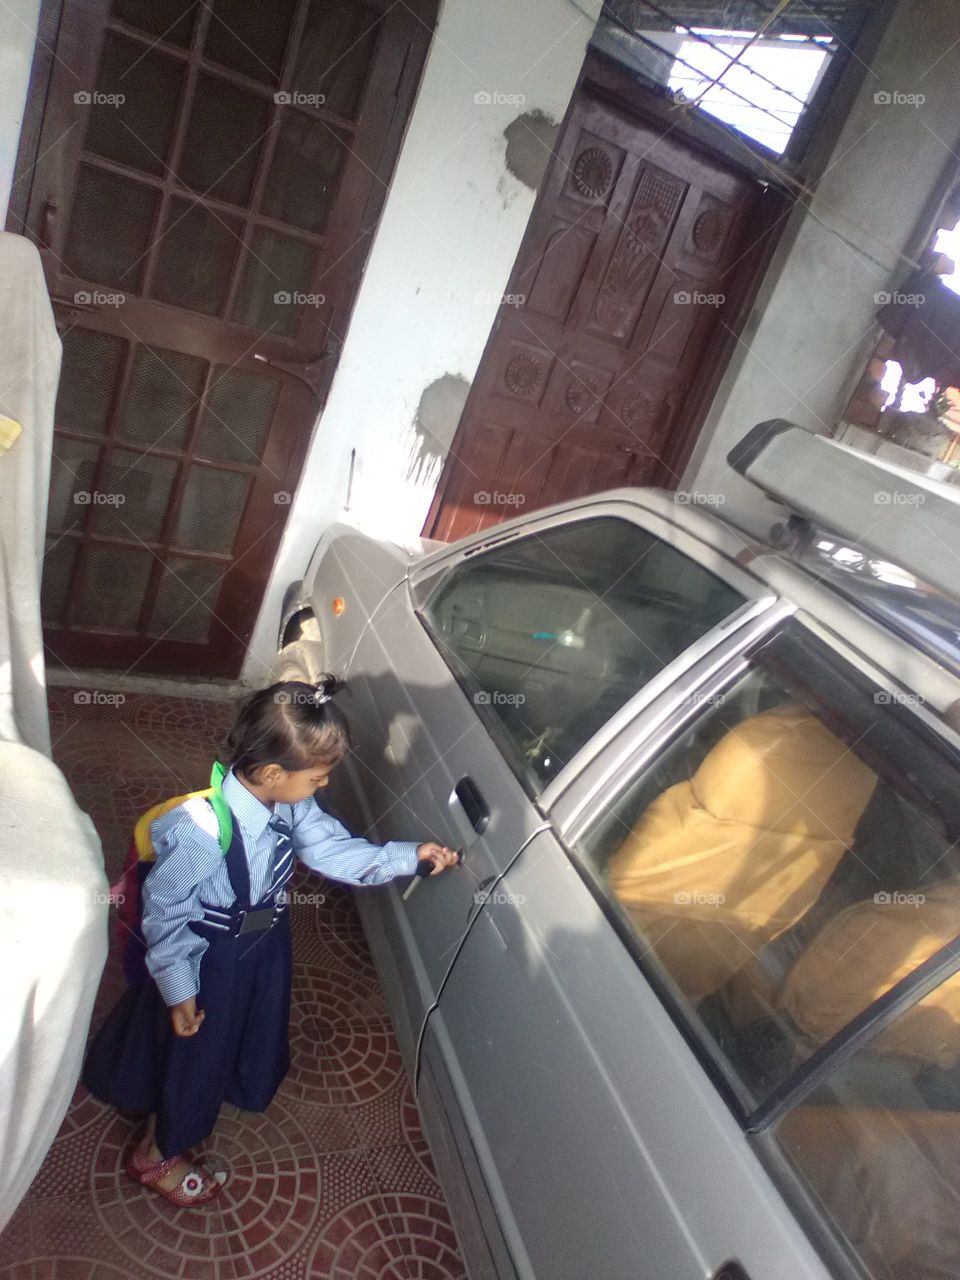 The child opening the car door